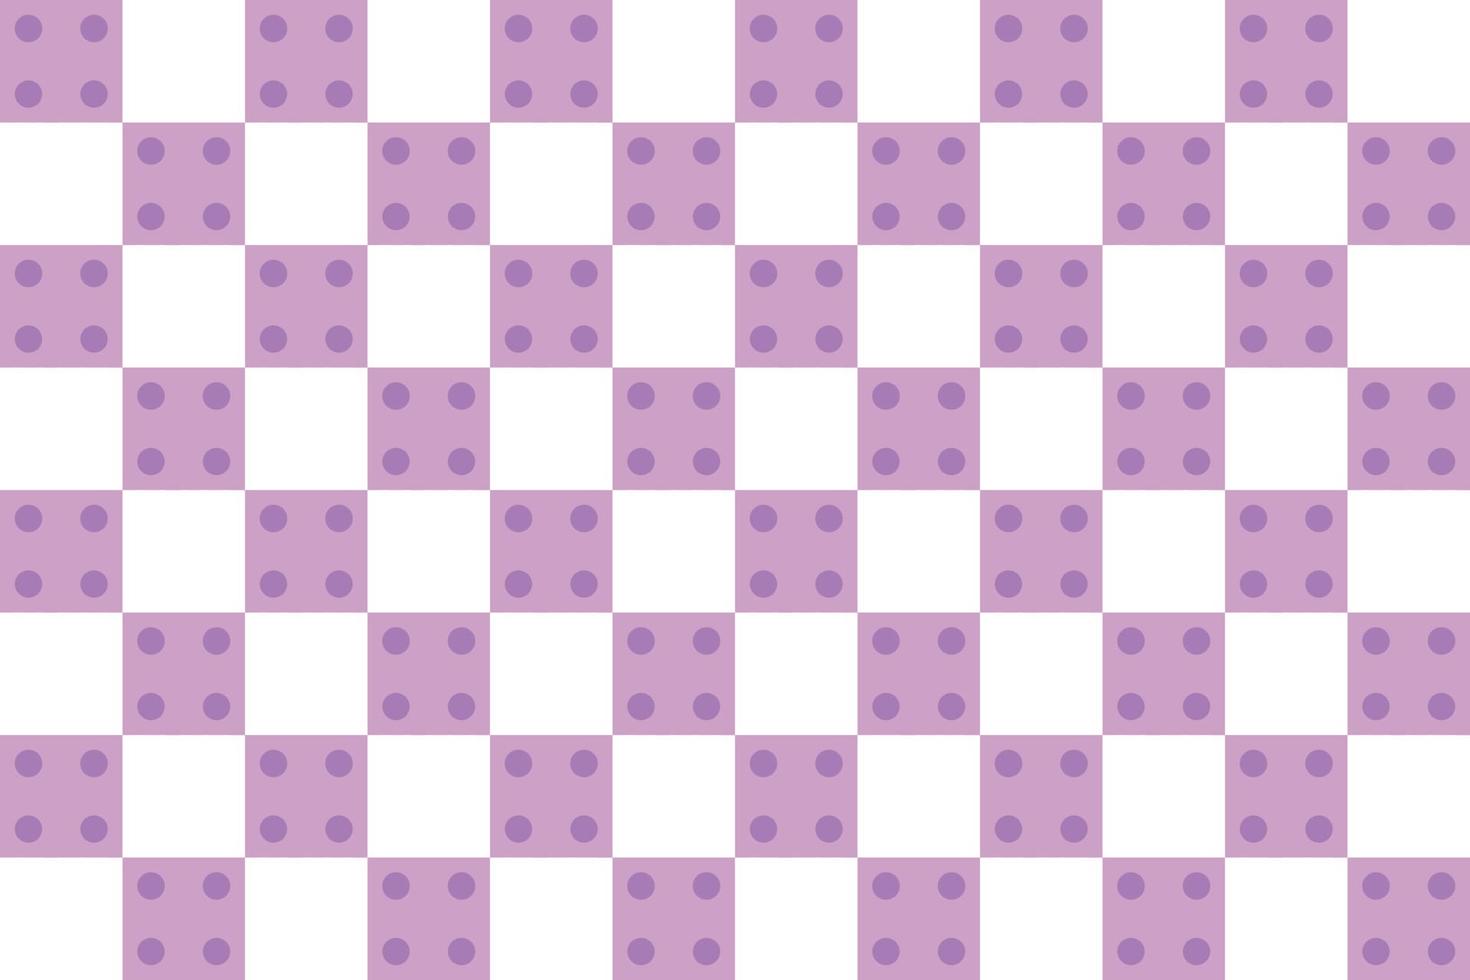 Geometric The Checkerboard Pattern The pattern typically contains Multi Colors where a single checker vector